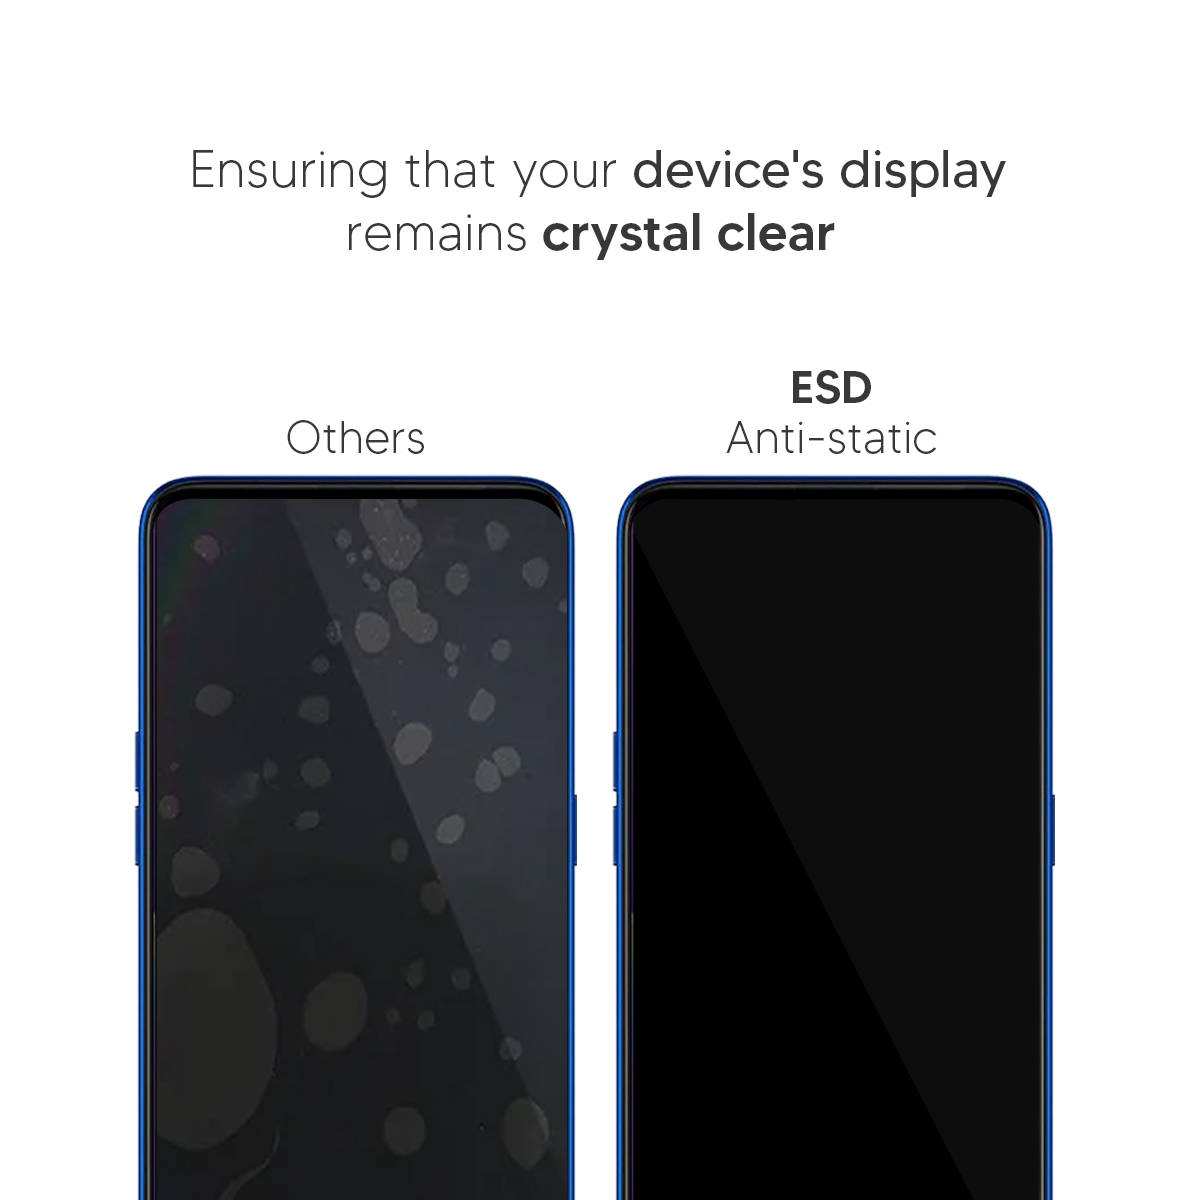 Beyox ESD Anti Static 5D Glass for Oppo A8